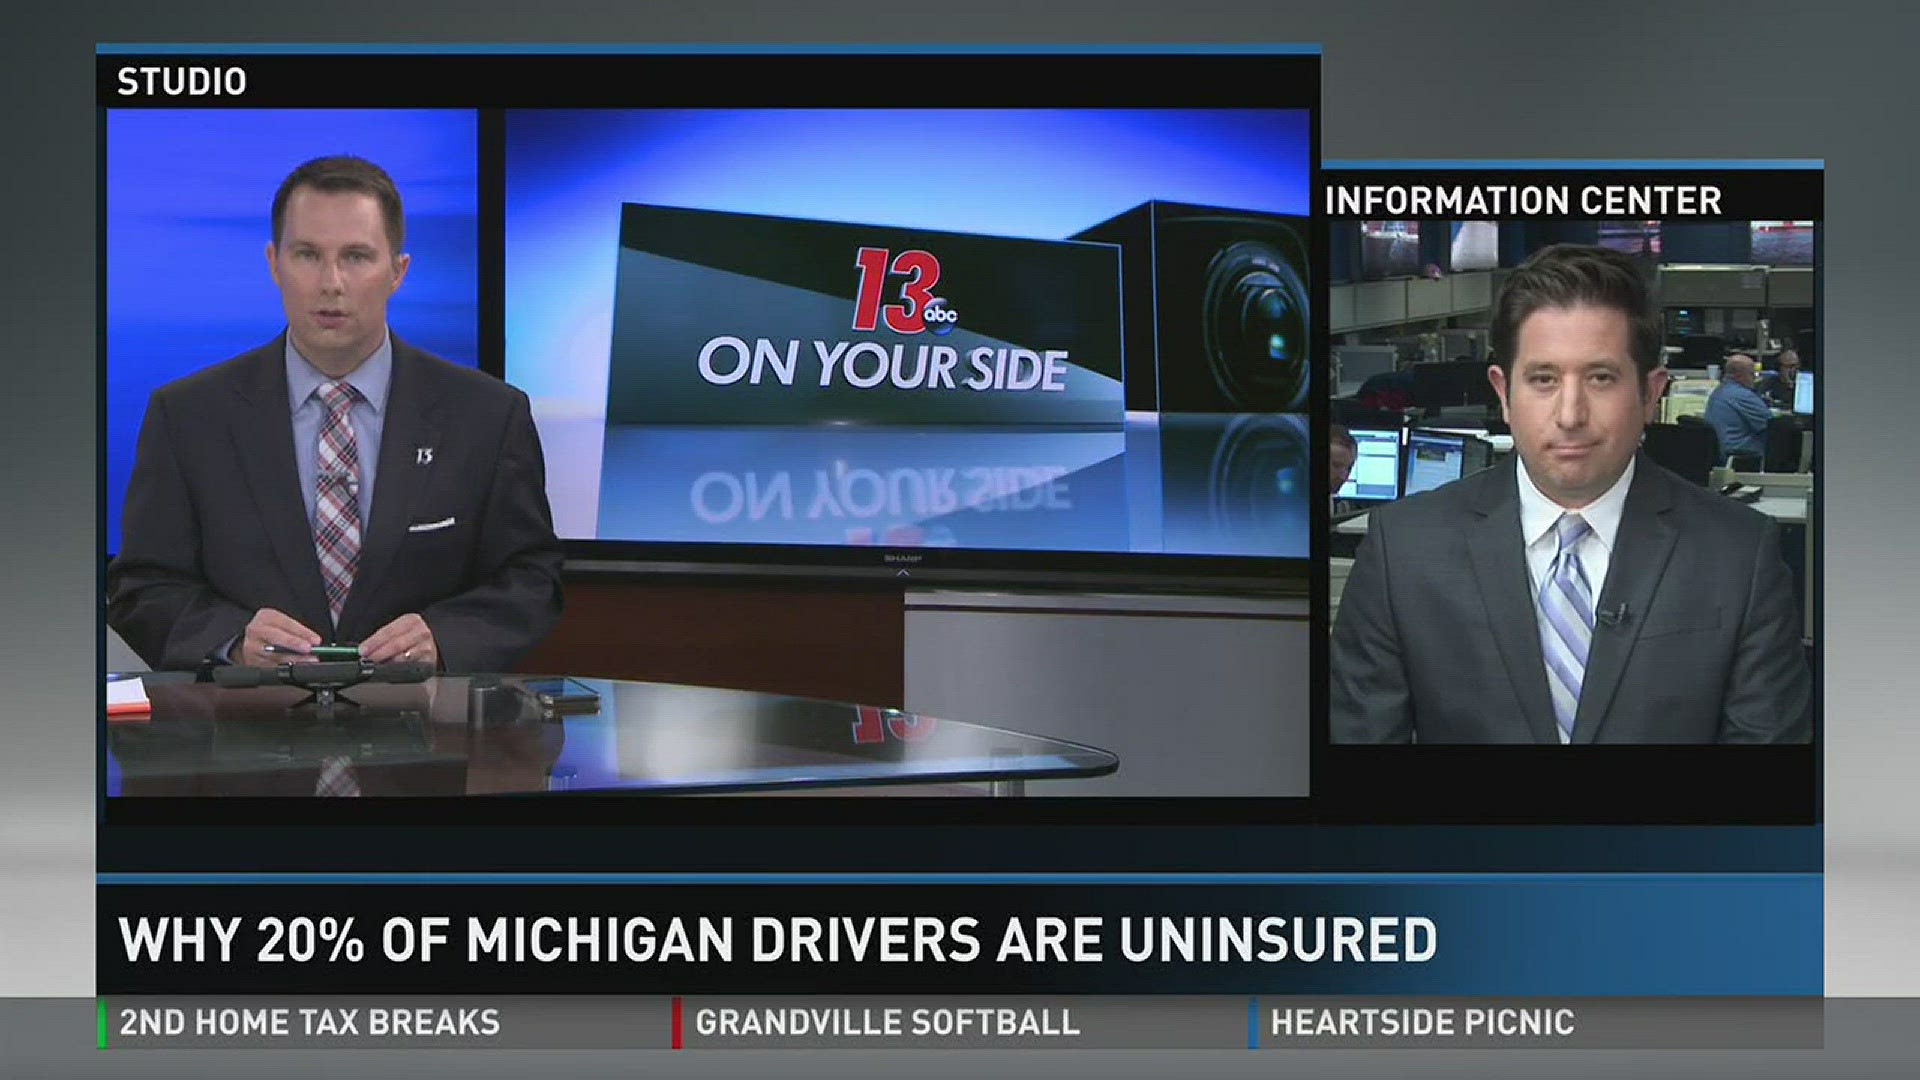 Why 20% of drivers are uninsured